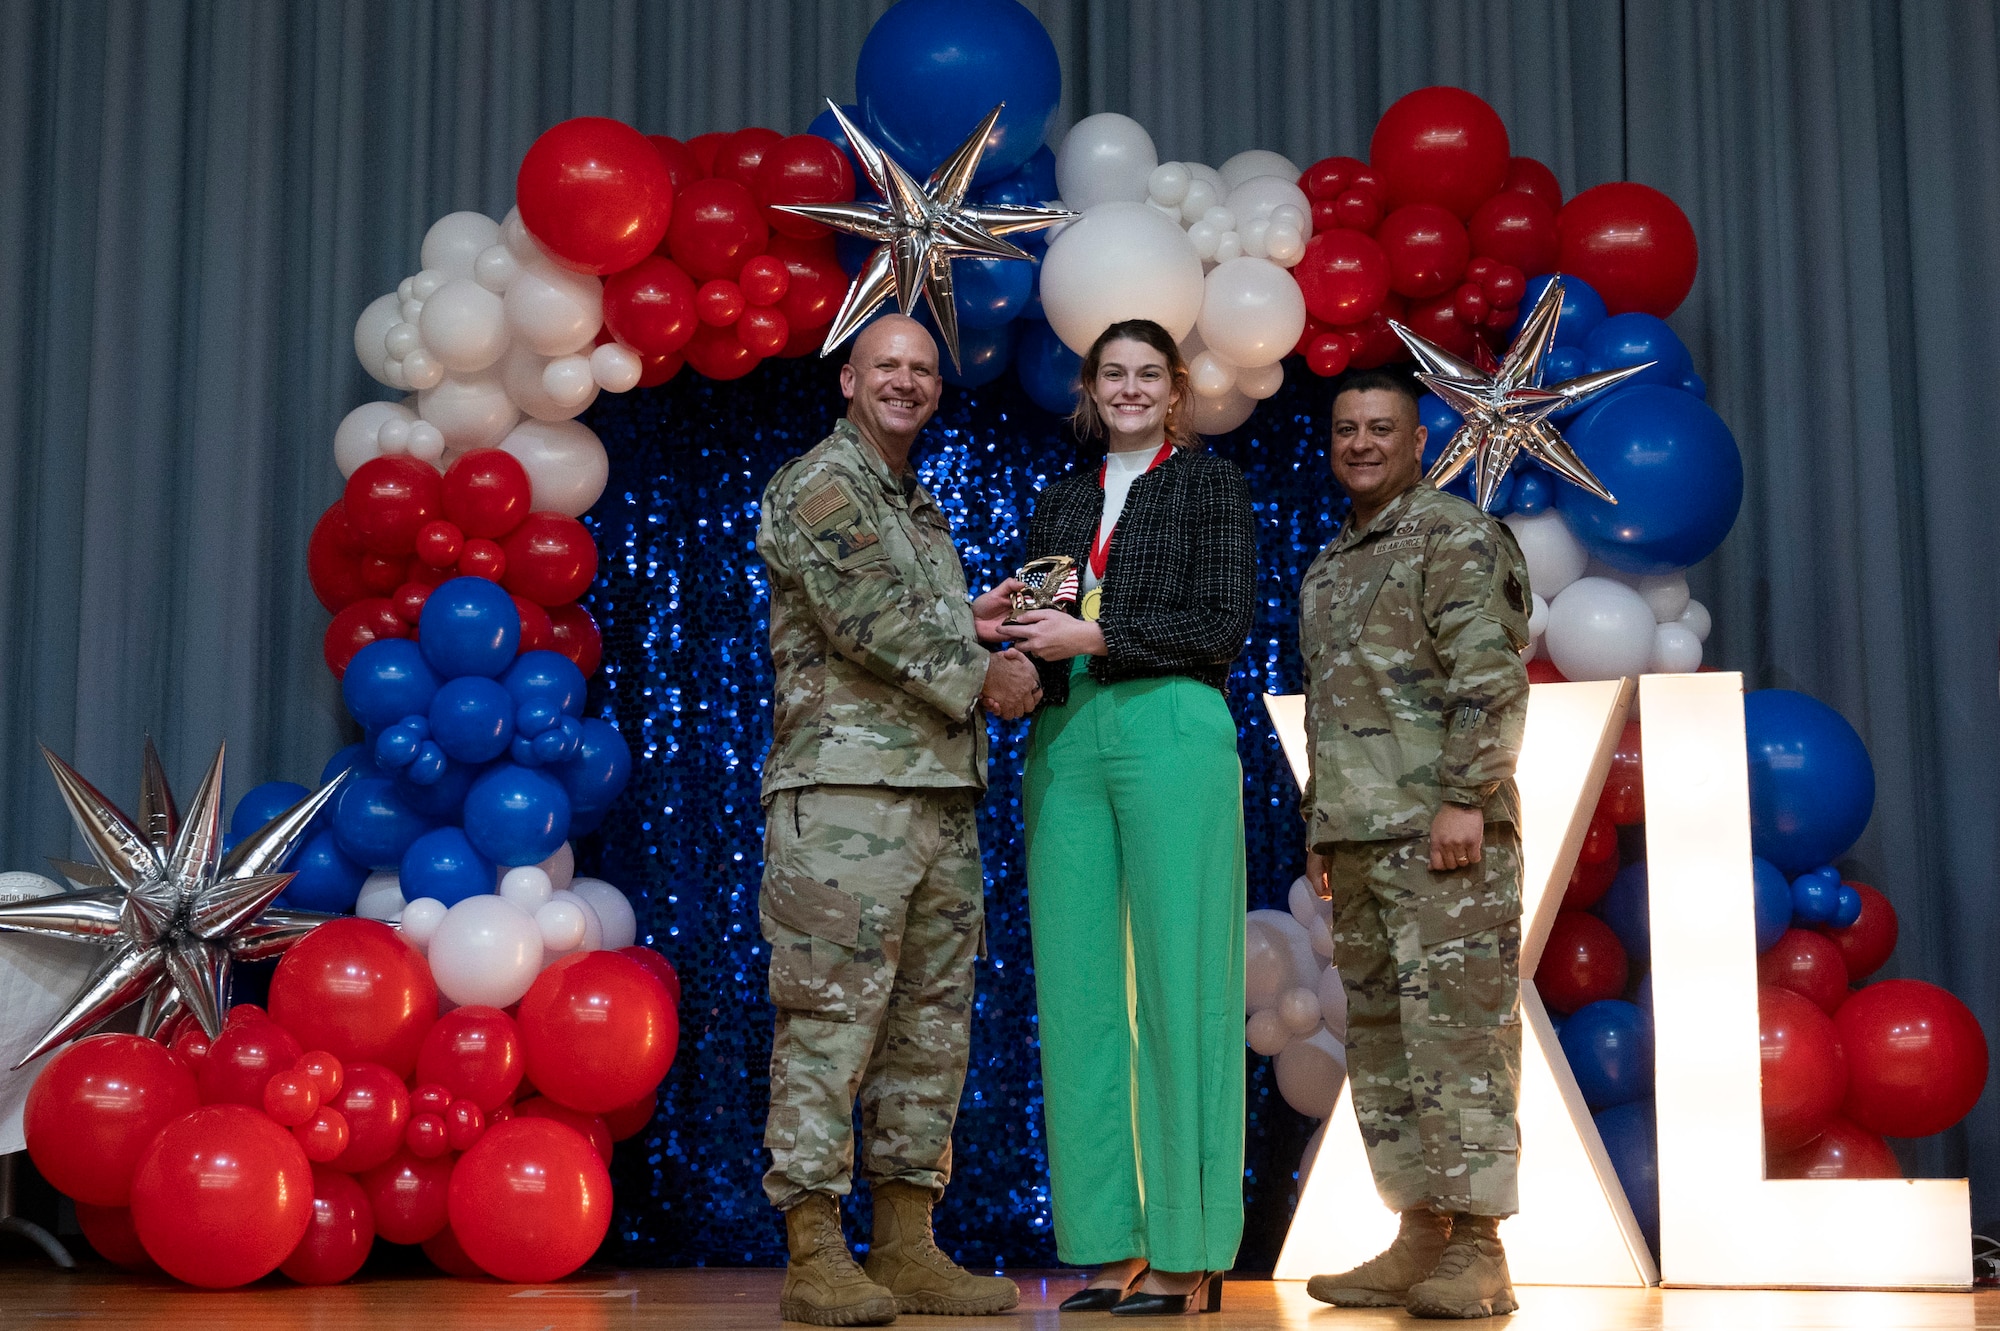 U.S. Air Force Col. Kevin Davidson, 47th Flying Training Wing (FTW) commander, and Chief Master Sgt. Lester Largaespada, 47th FTW command chief, present Catherine Stephens, 434th Flying Training Squadron key spouse, an award during the 2023 47th FTW Annual Awards Ceremony at Laughlin Air Force Base, Texas, Feb. 2, 2024. The annual awards recognized the top performers throughout the 47th Flying Training Wing during fiscal year 2023. (U.S. Air Force photo by Senior Airman Kailee Reynolds)